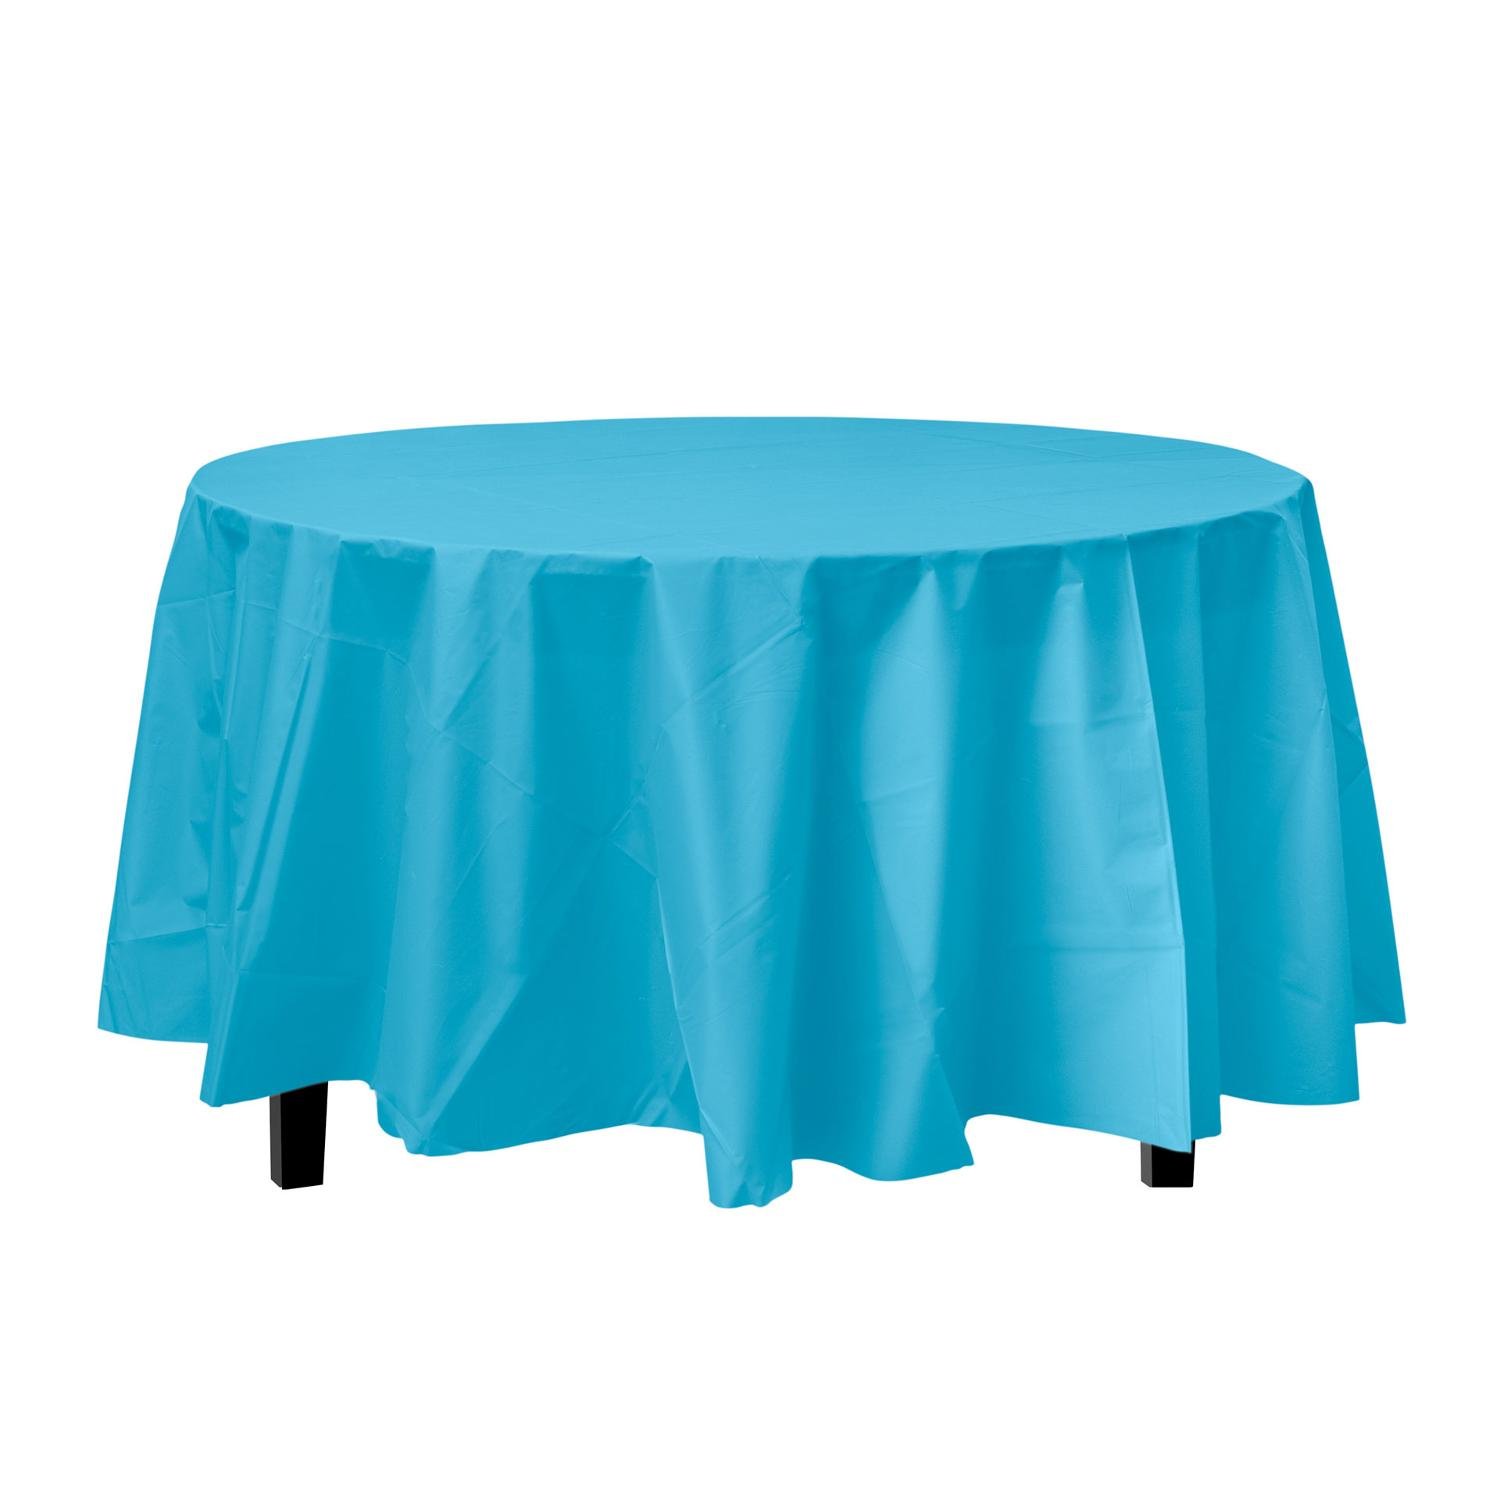 Turquoise Round plastic table cover (Case of 48)